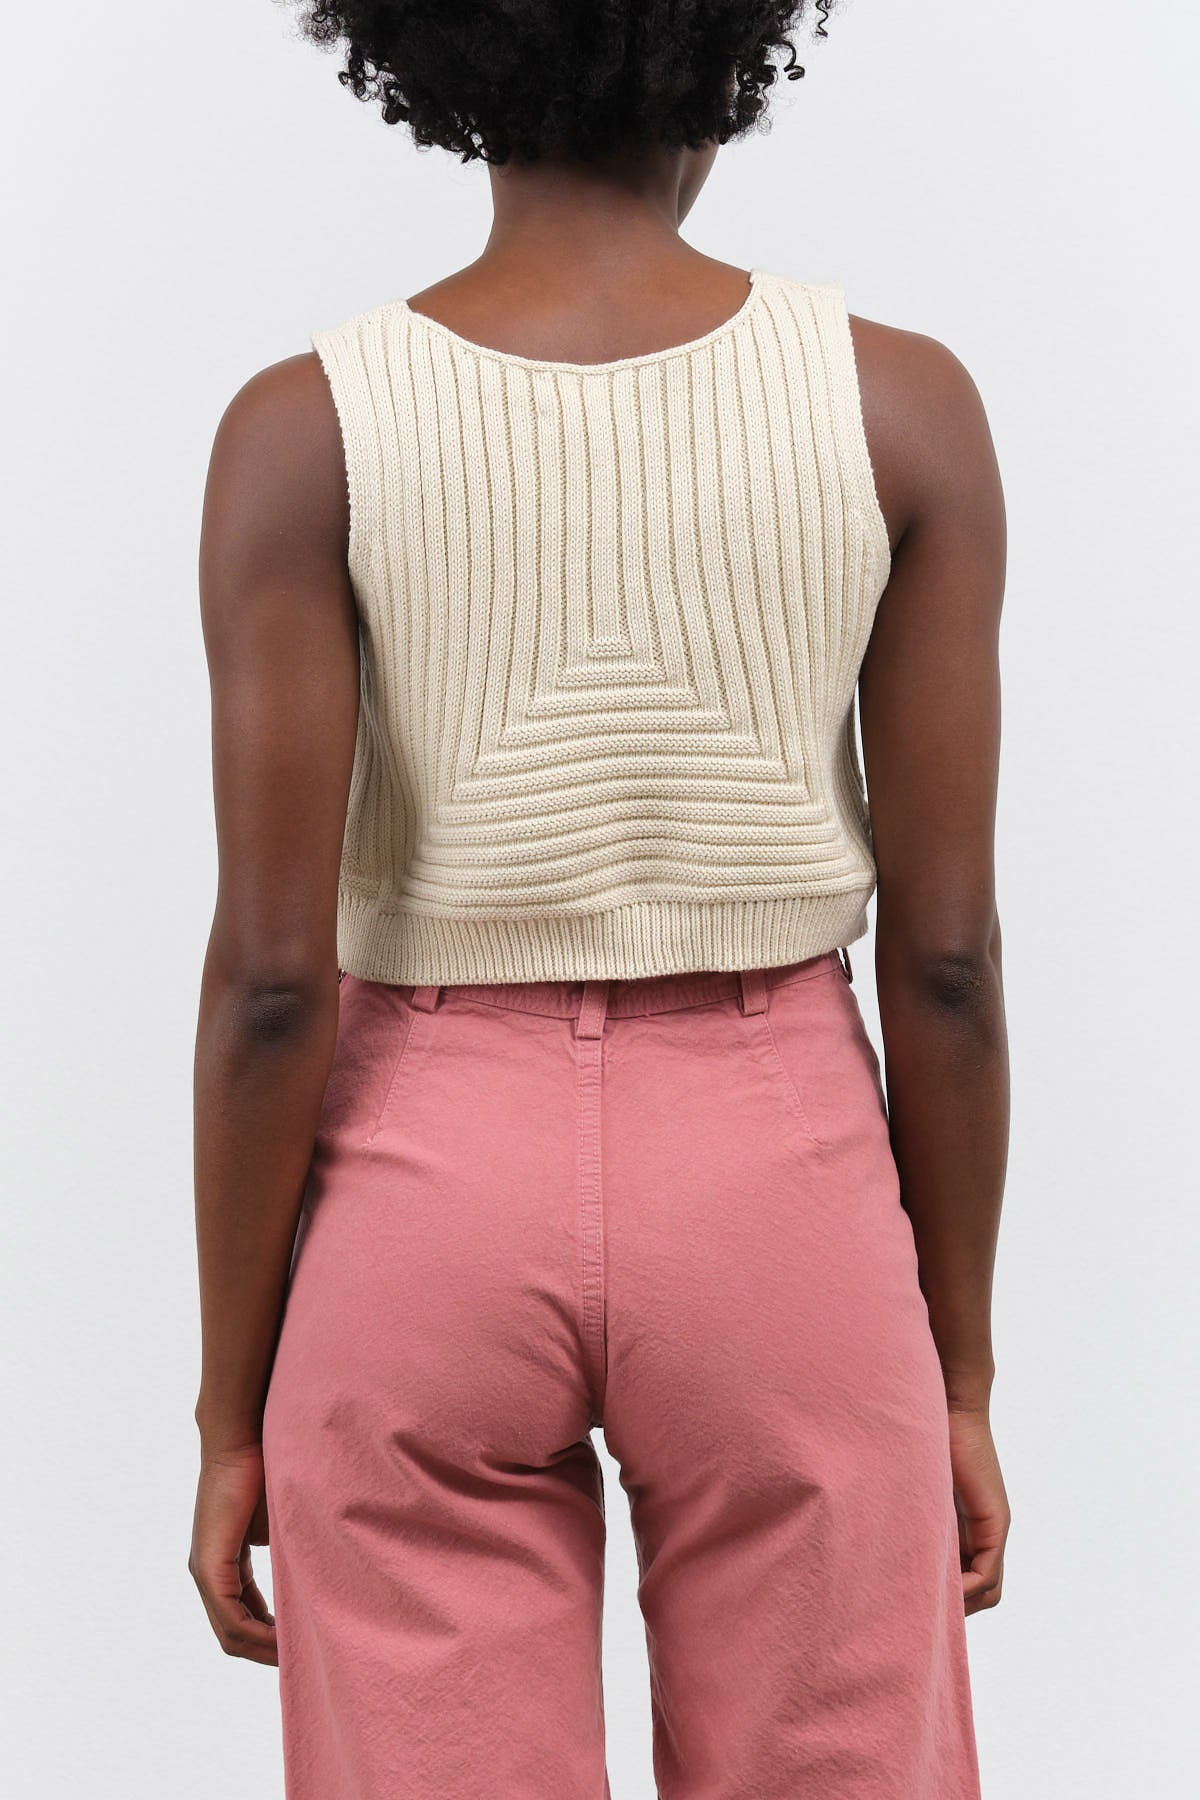 Cropped Rib Top Tank in Cream White by Atelier Delphine with Ribbed Hem and Triangle Stitch